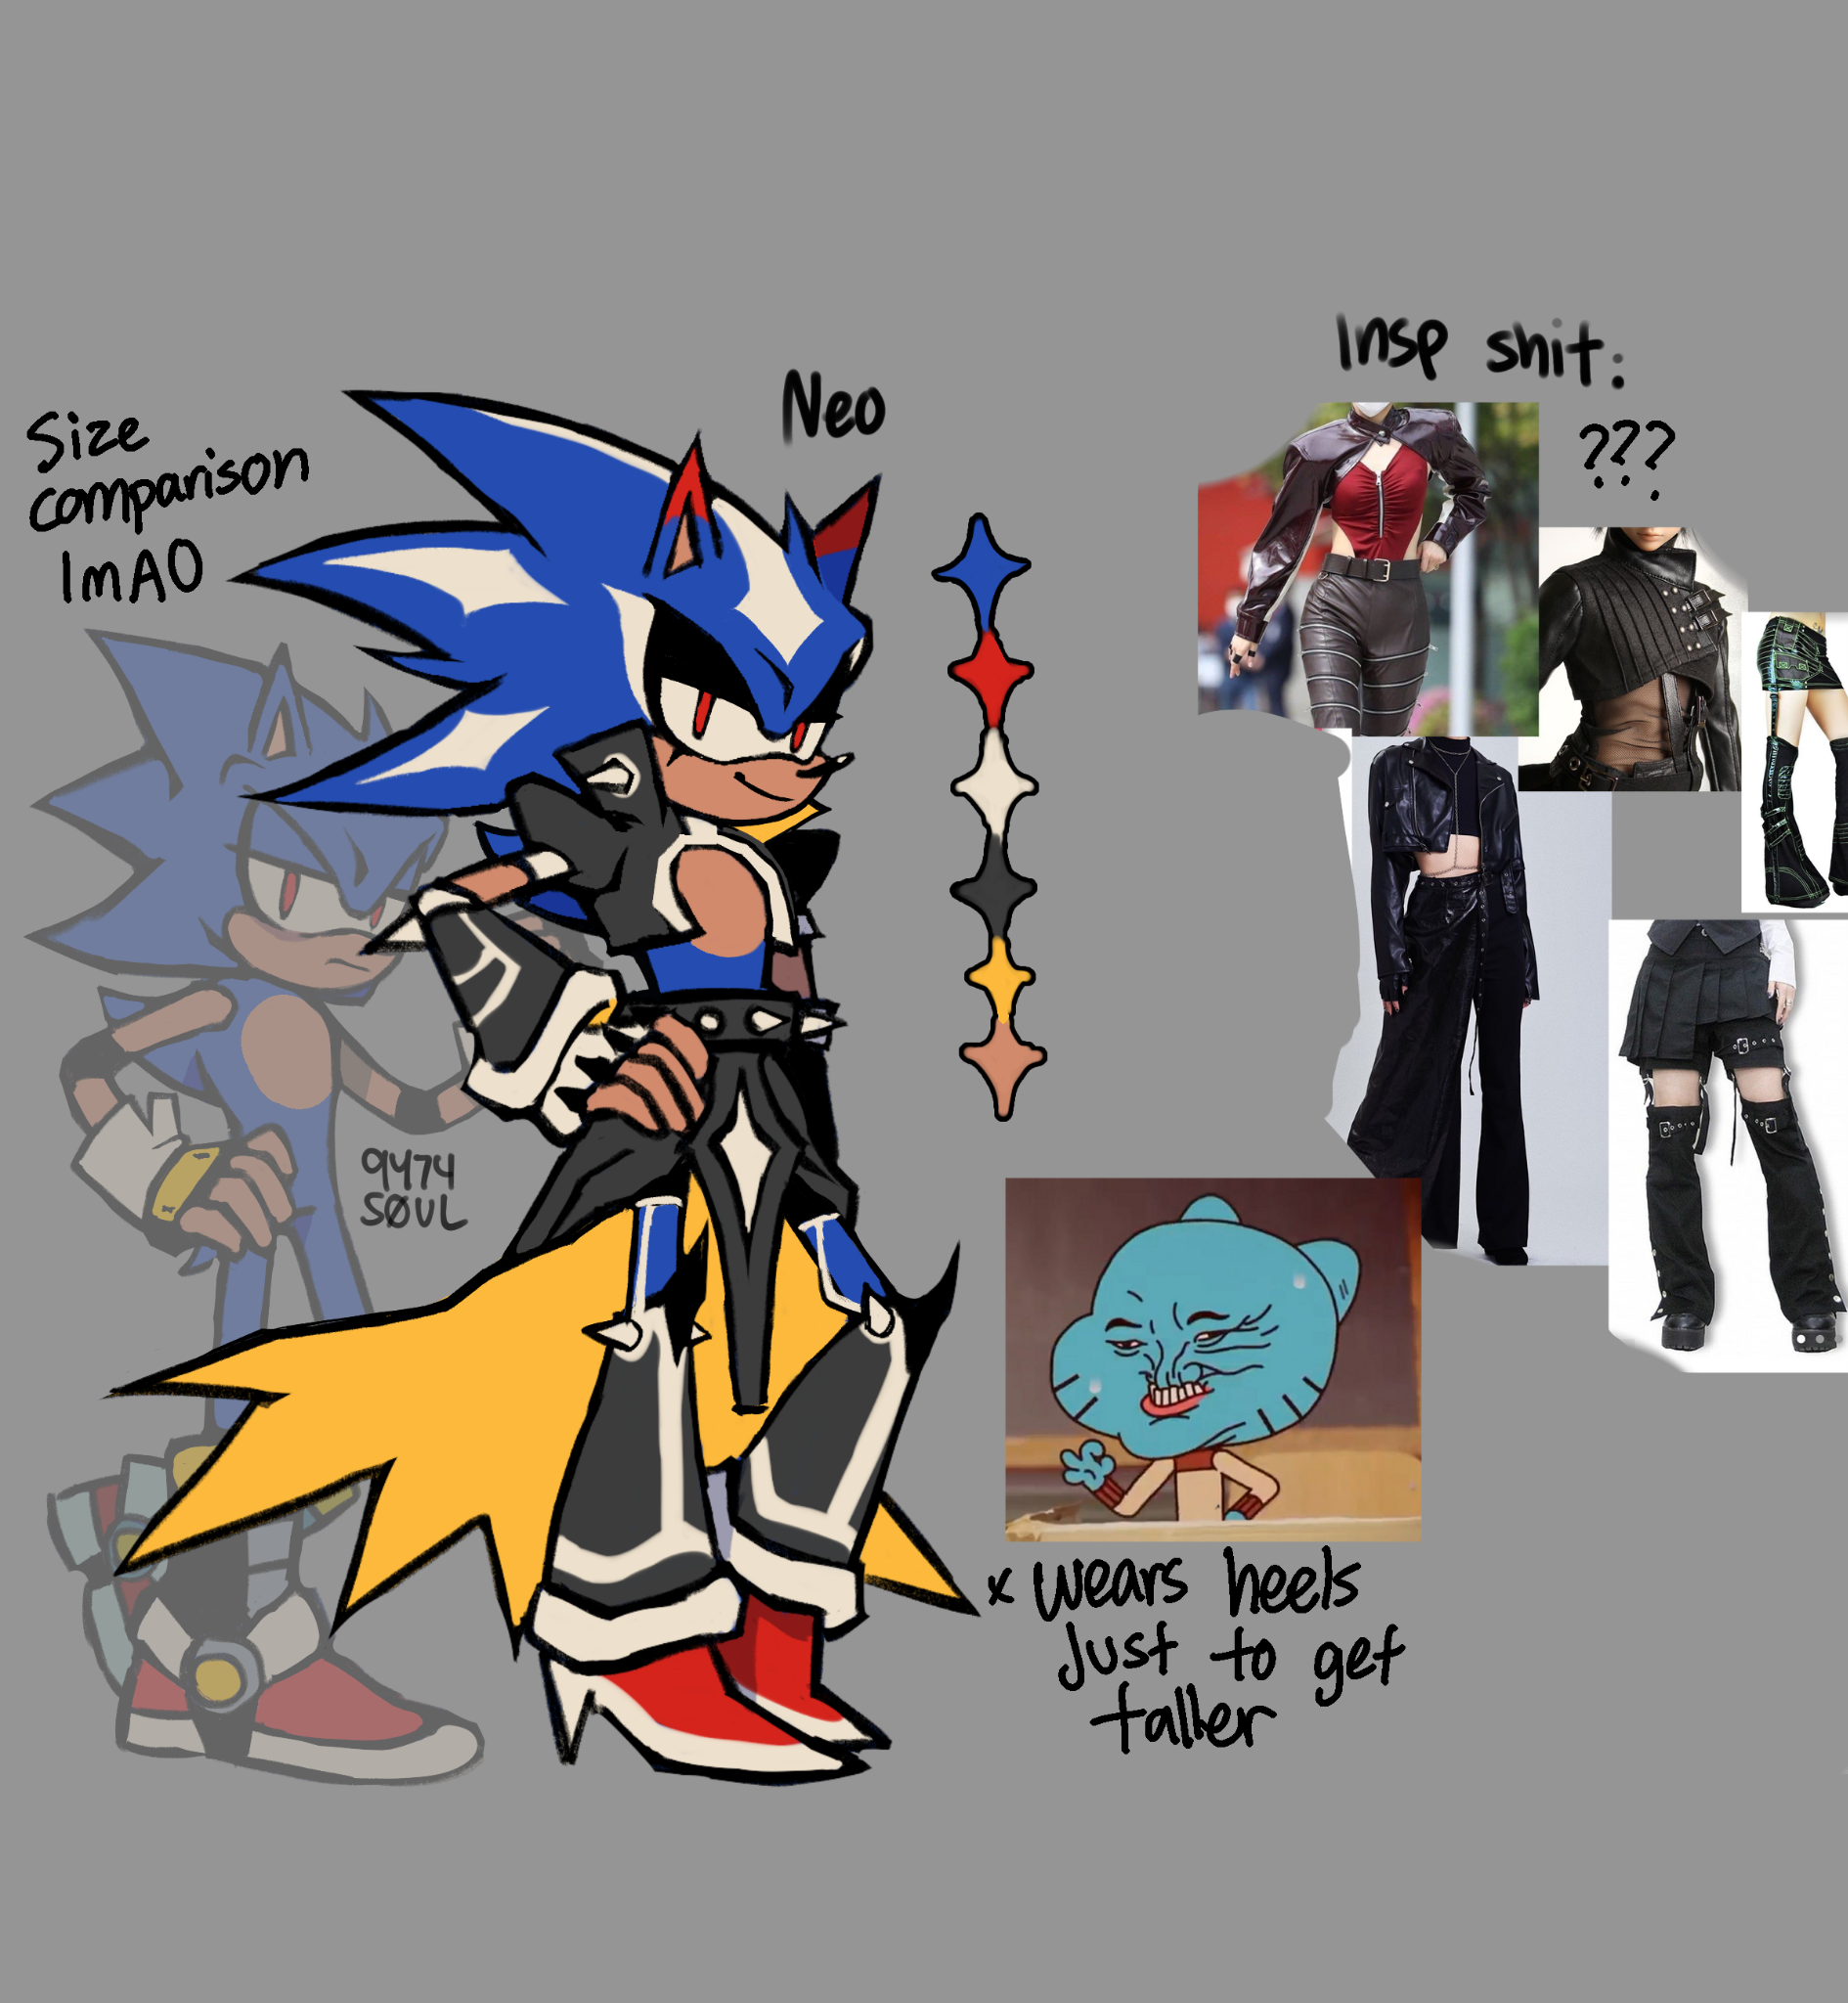 shadow the hedgehog and metal sonic (sonic and 1 more) drawn by